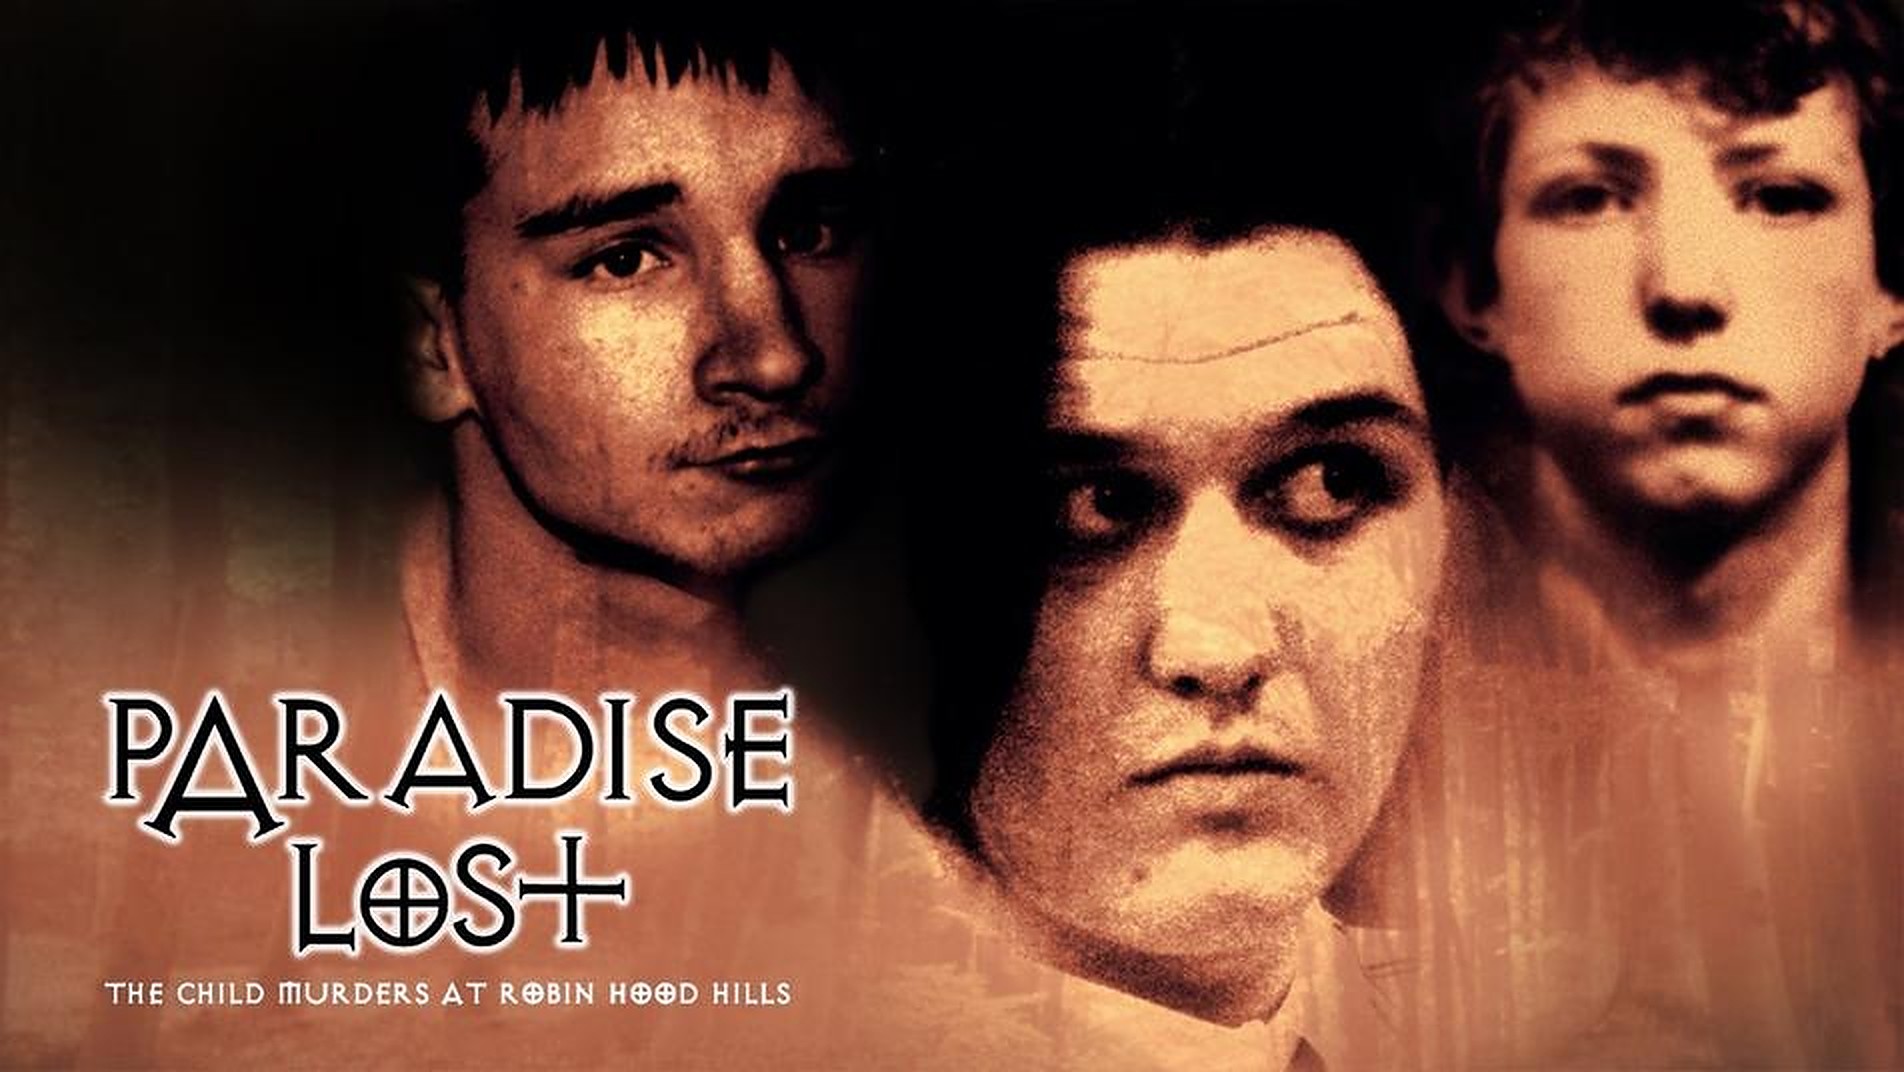 41-facts-about-the-movie-paradise-lost-the-child-murders-at-robin-hood-hills